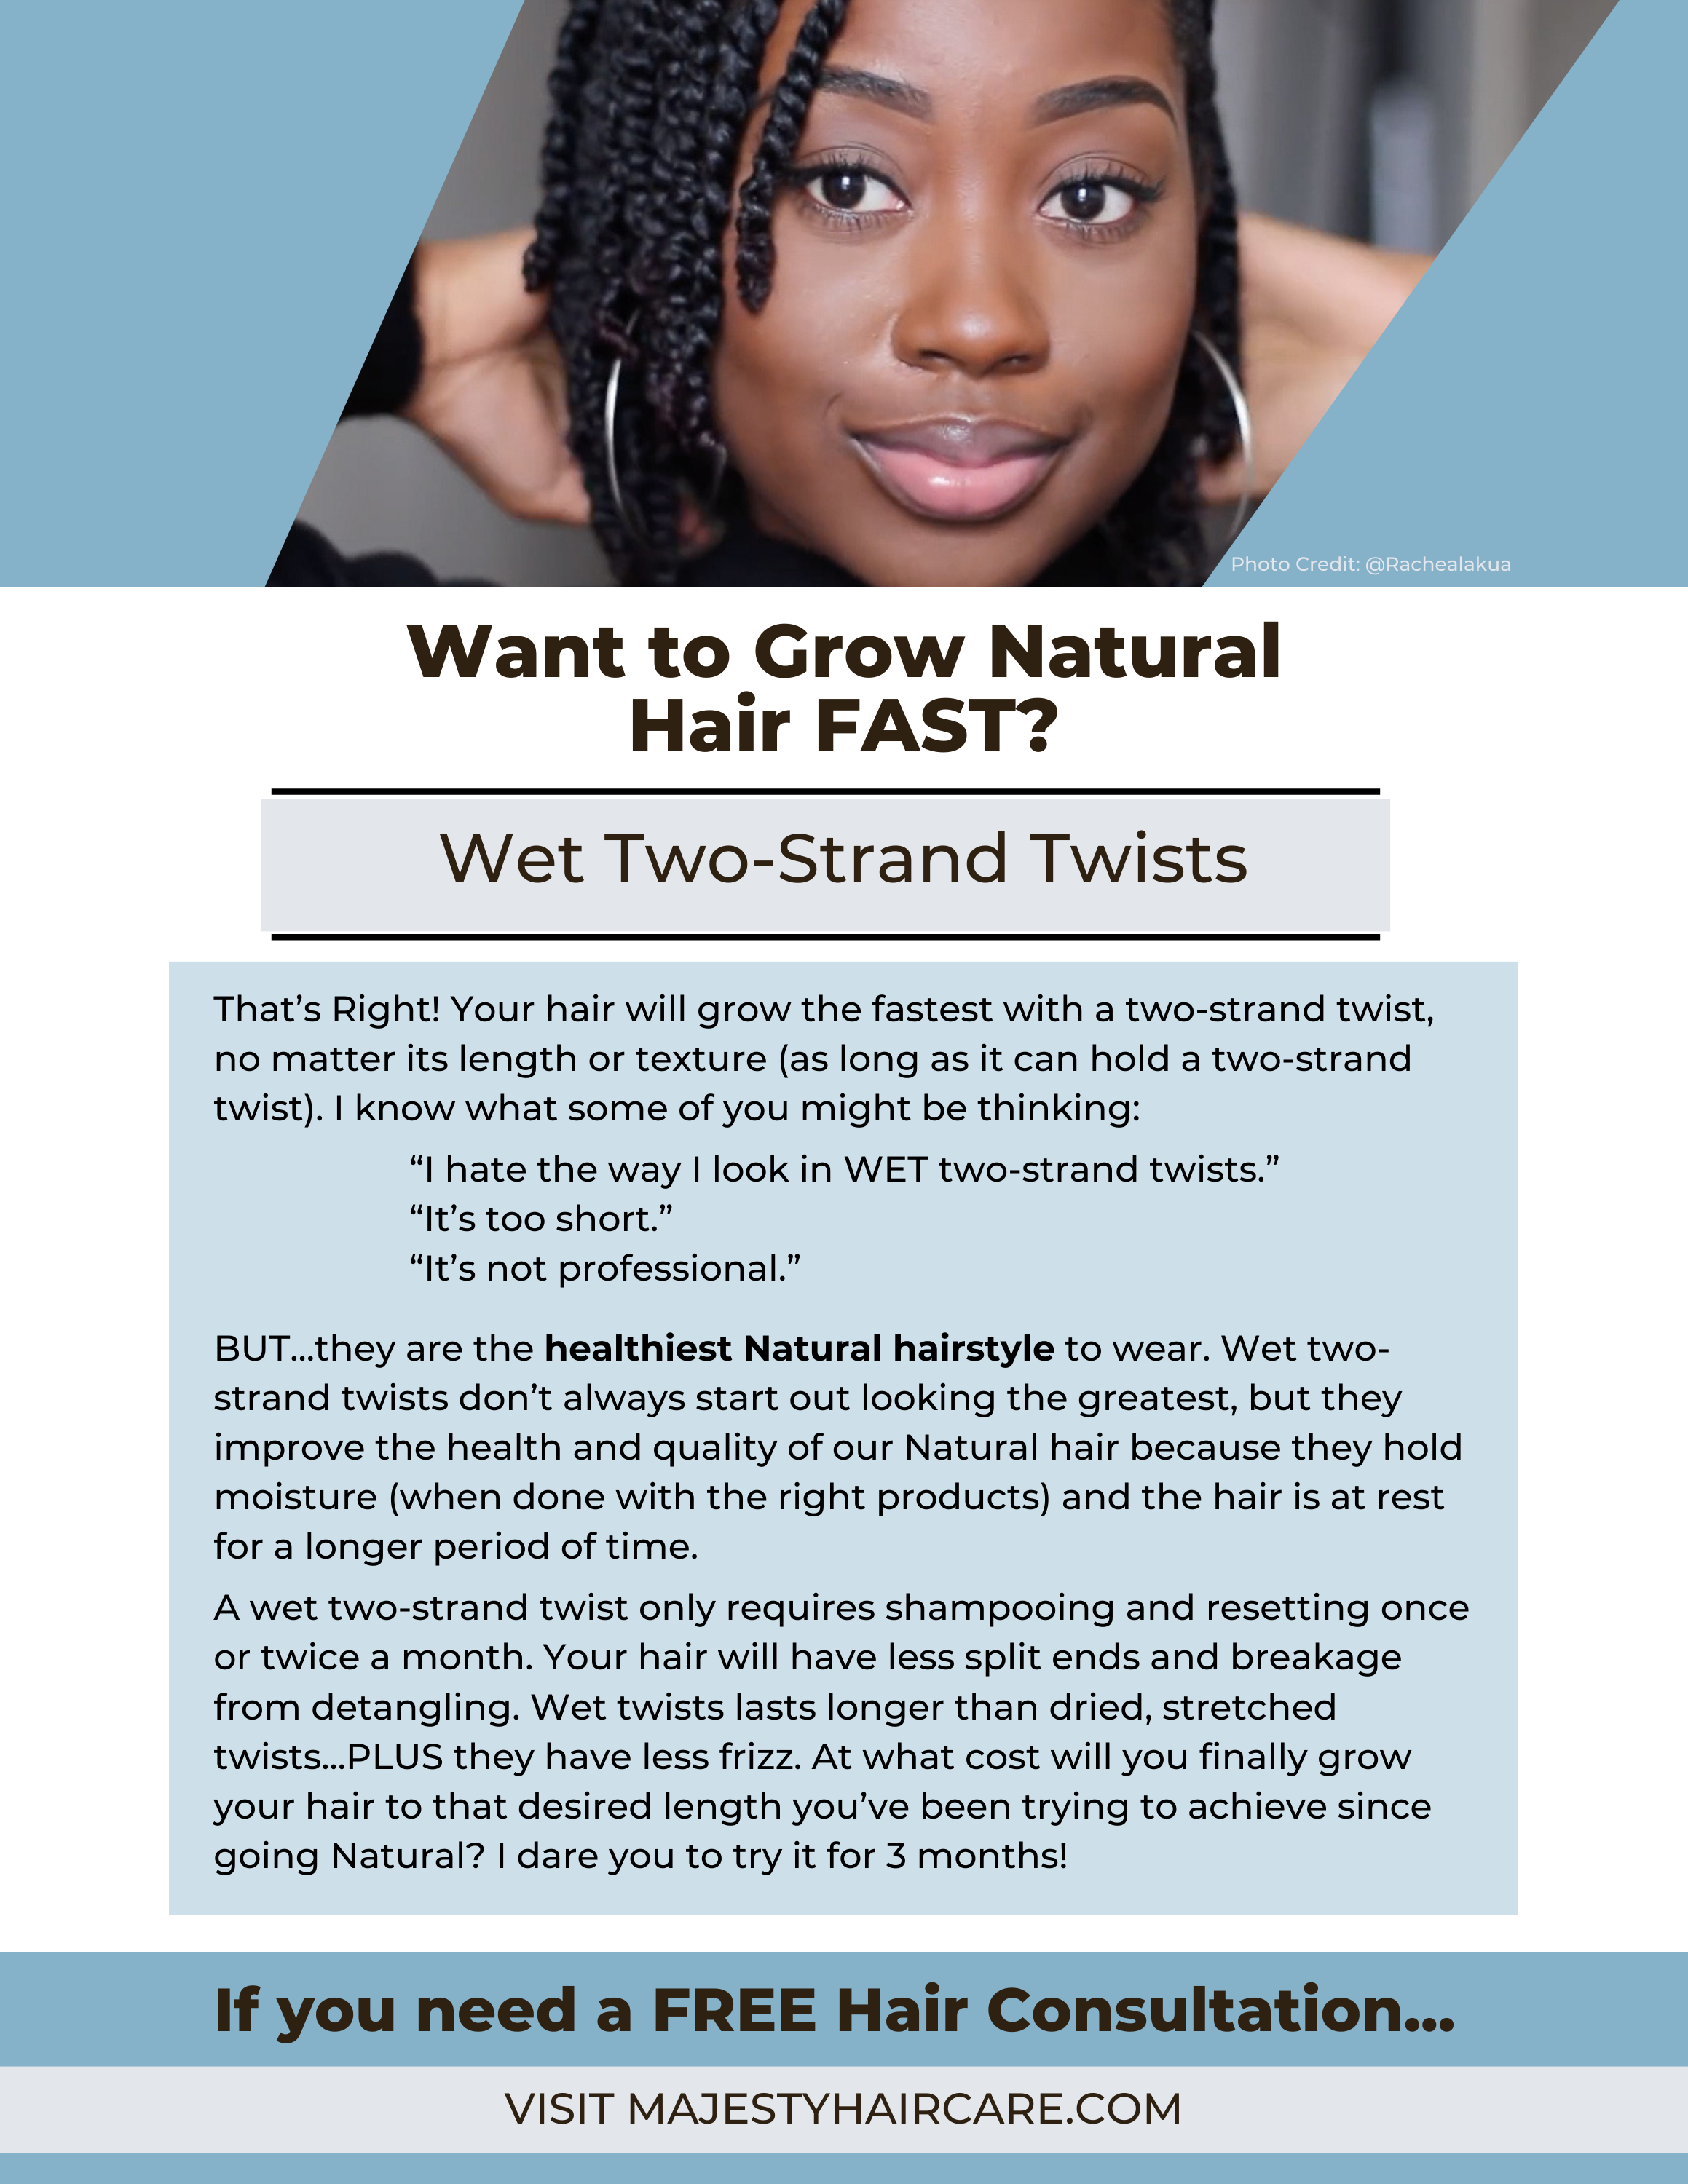 Majesty Hair Care Newsletter_Want to Grow Natural Hair Fast__FINAL.png__PID:69bb8563-5207-485c-8e70-2f3113c22c57